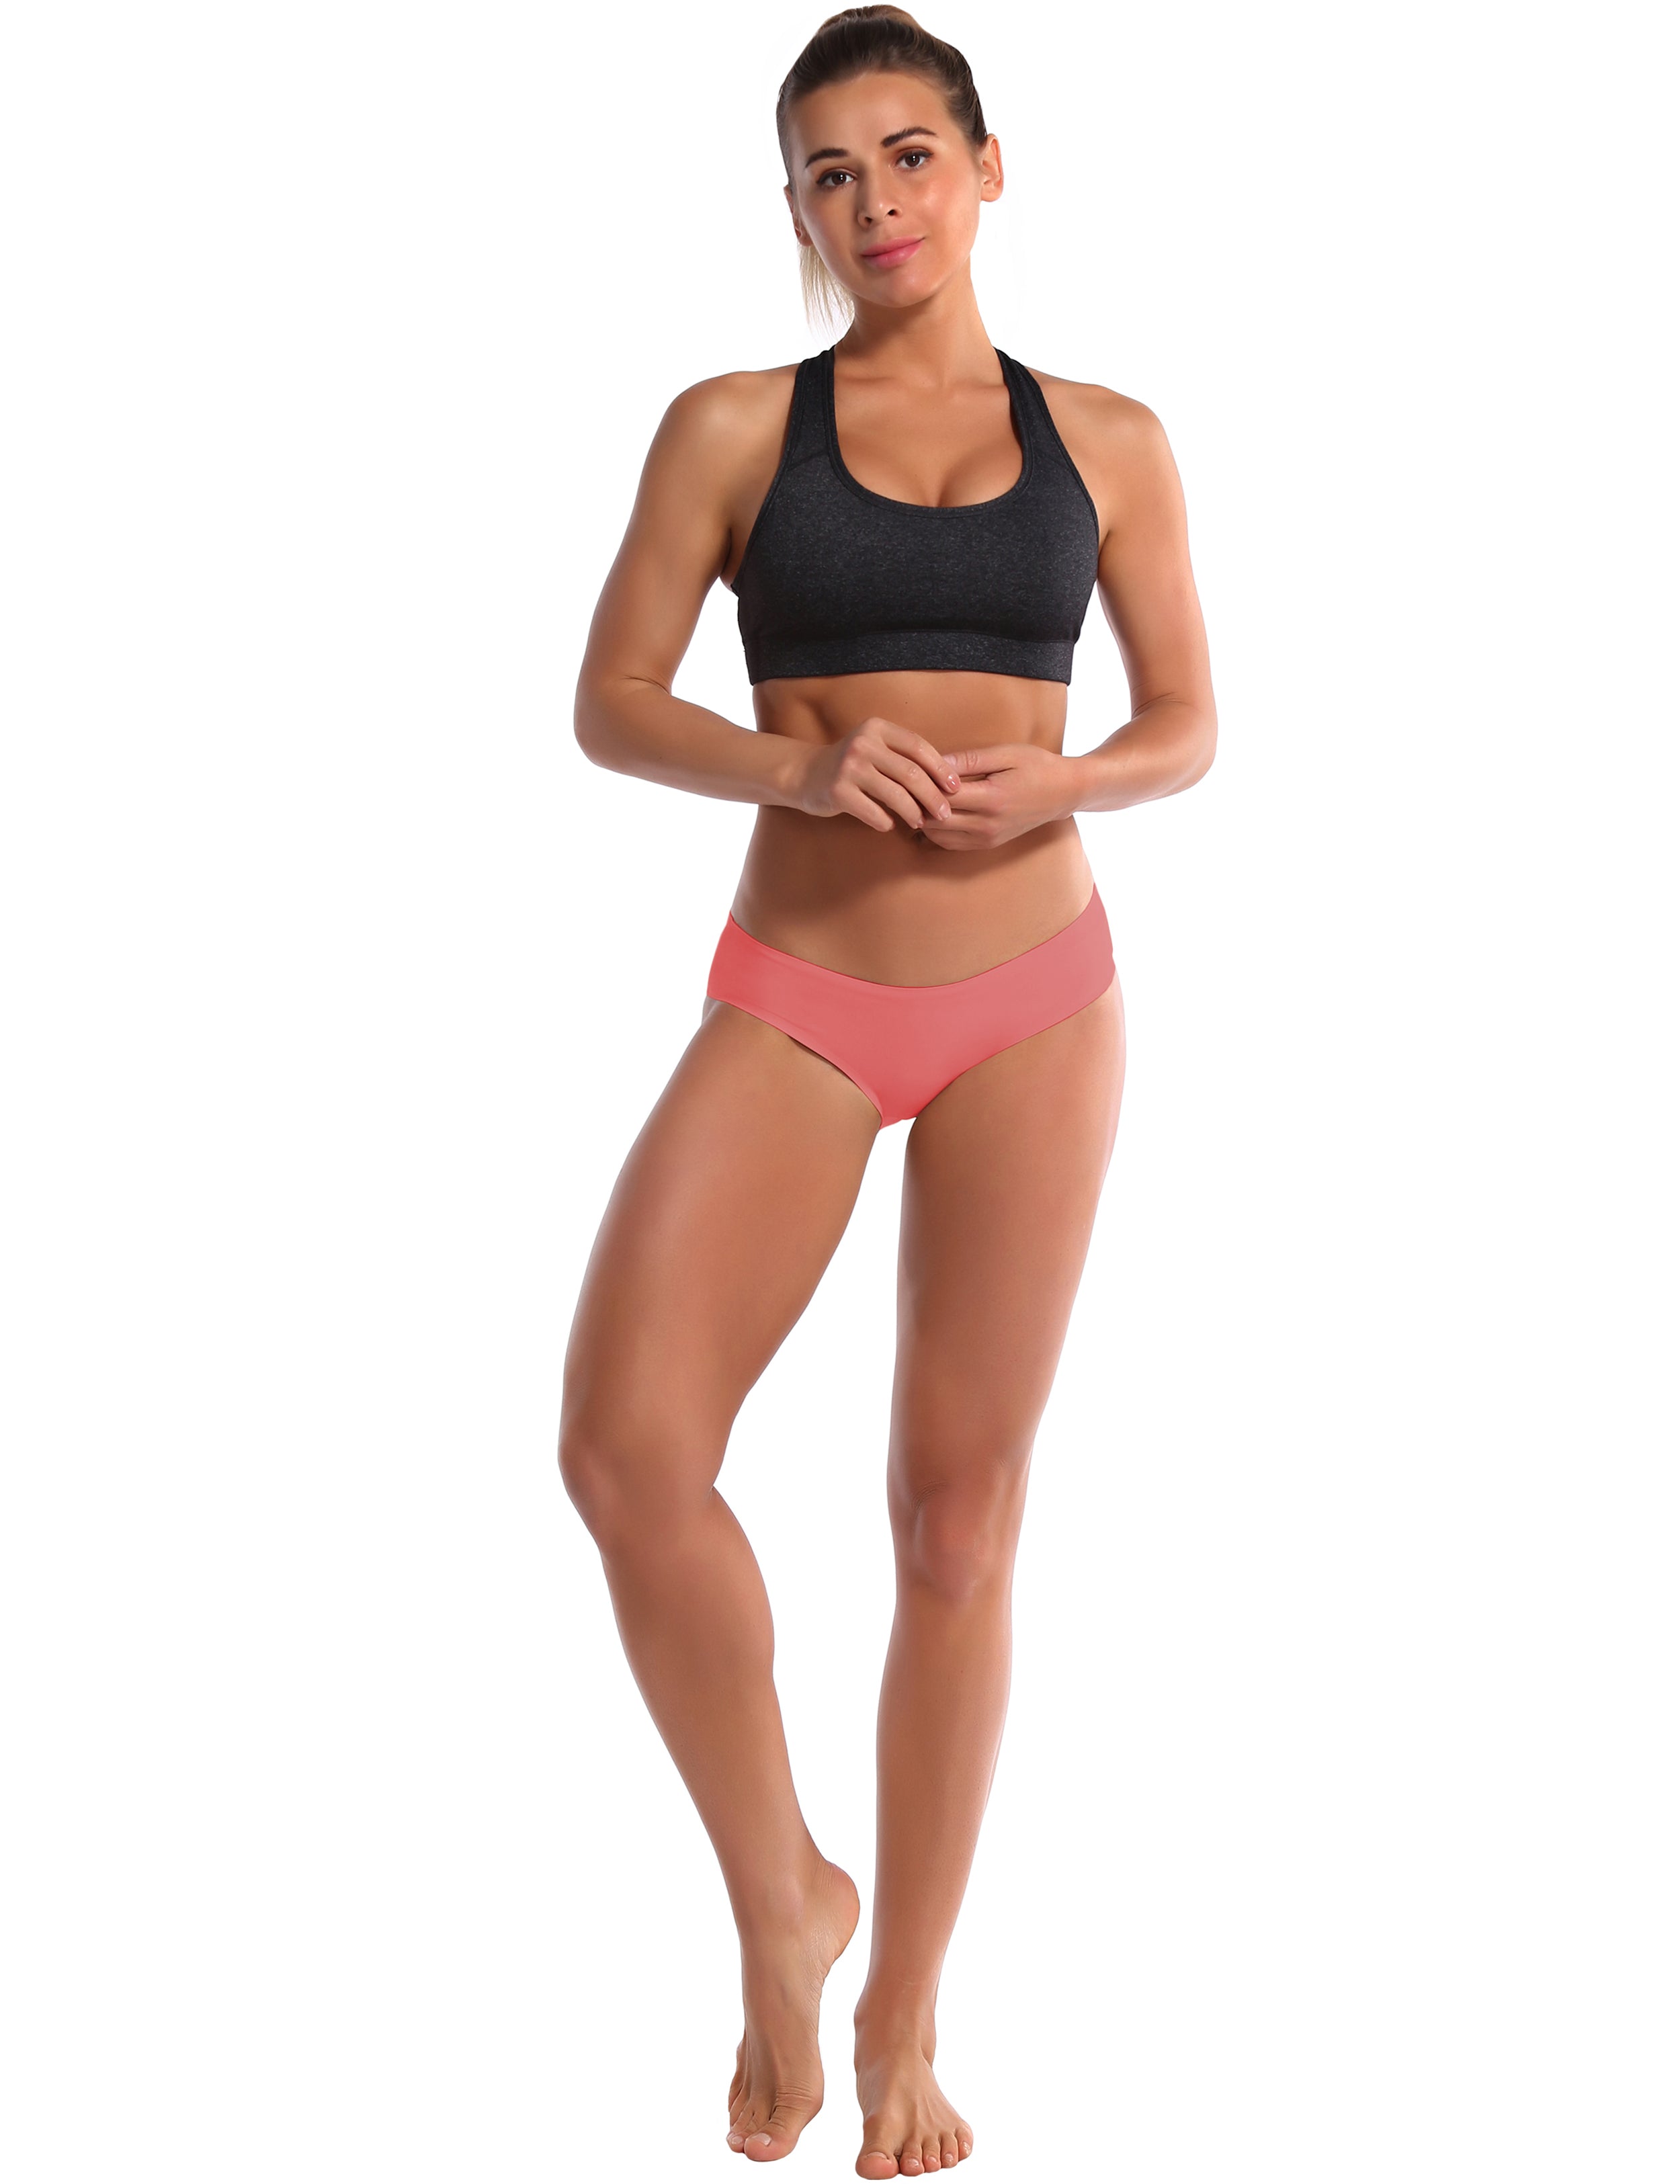 Invisibles Sport Bikini Panties crushcoral Sleek, soft, smooth and totally comfortable: our newest bikini style is here. High elasticity High density Softest-ever fabric Laser cutting Unsealed Comfortable No panty lines Machine wash 95% Nylon, 5% Spandex